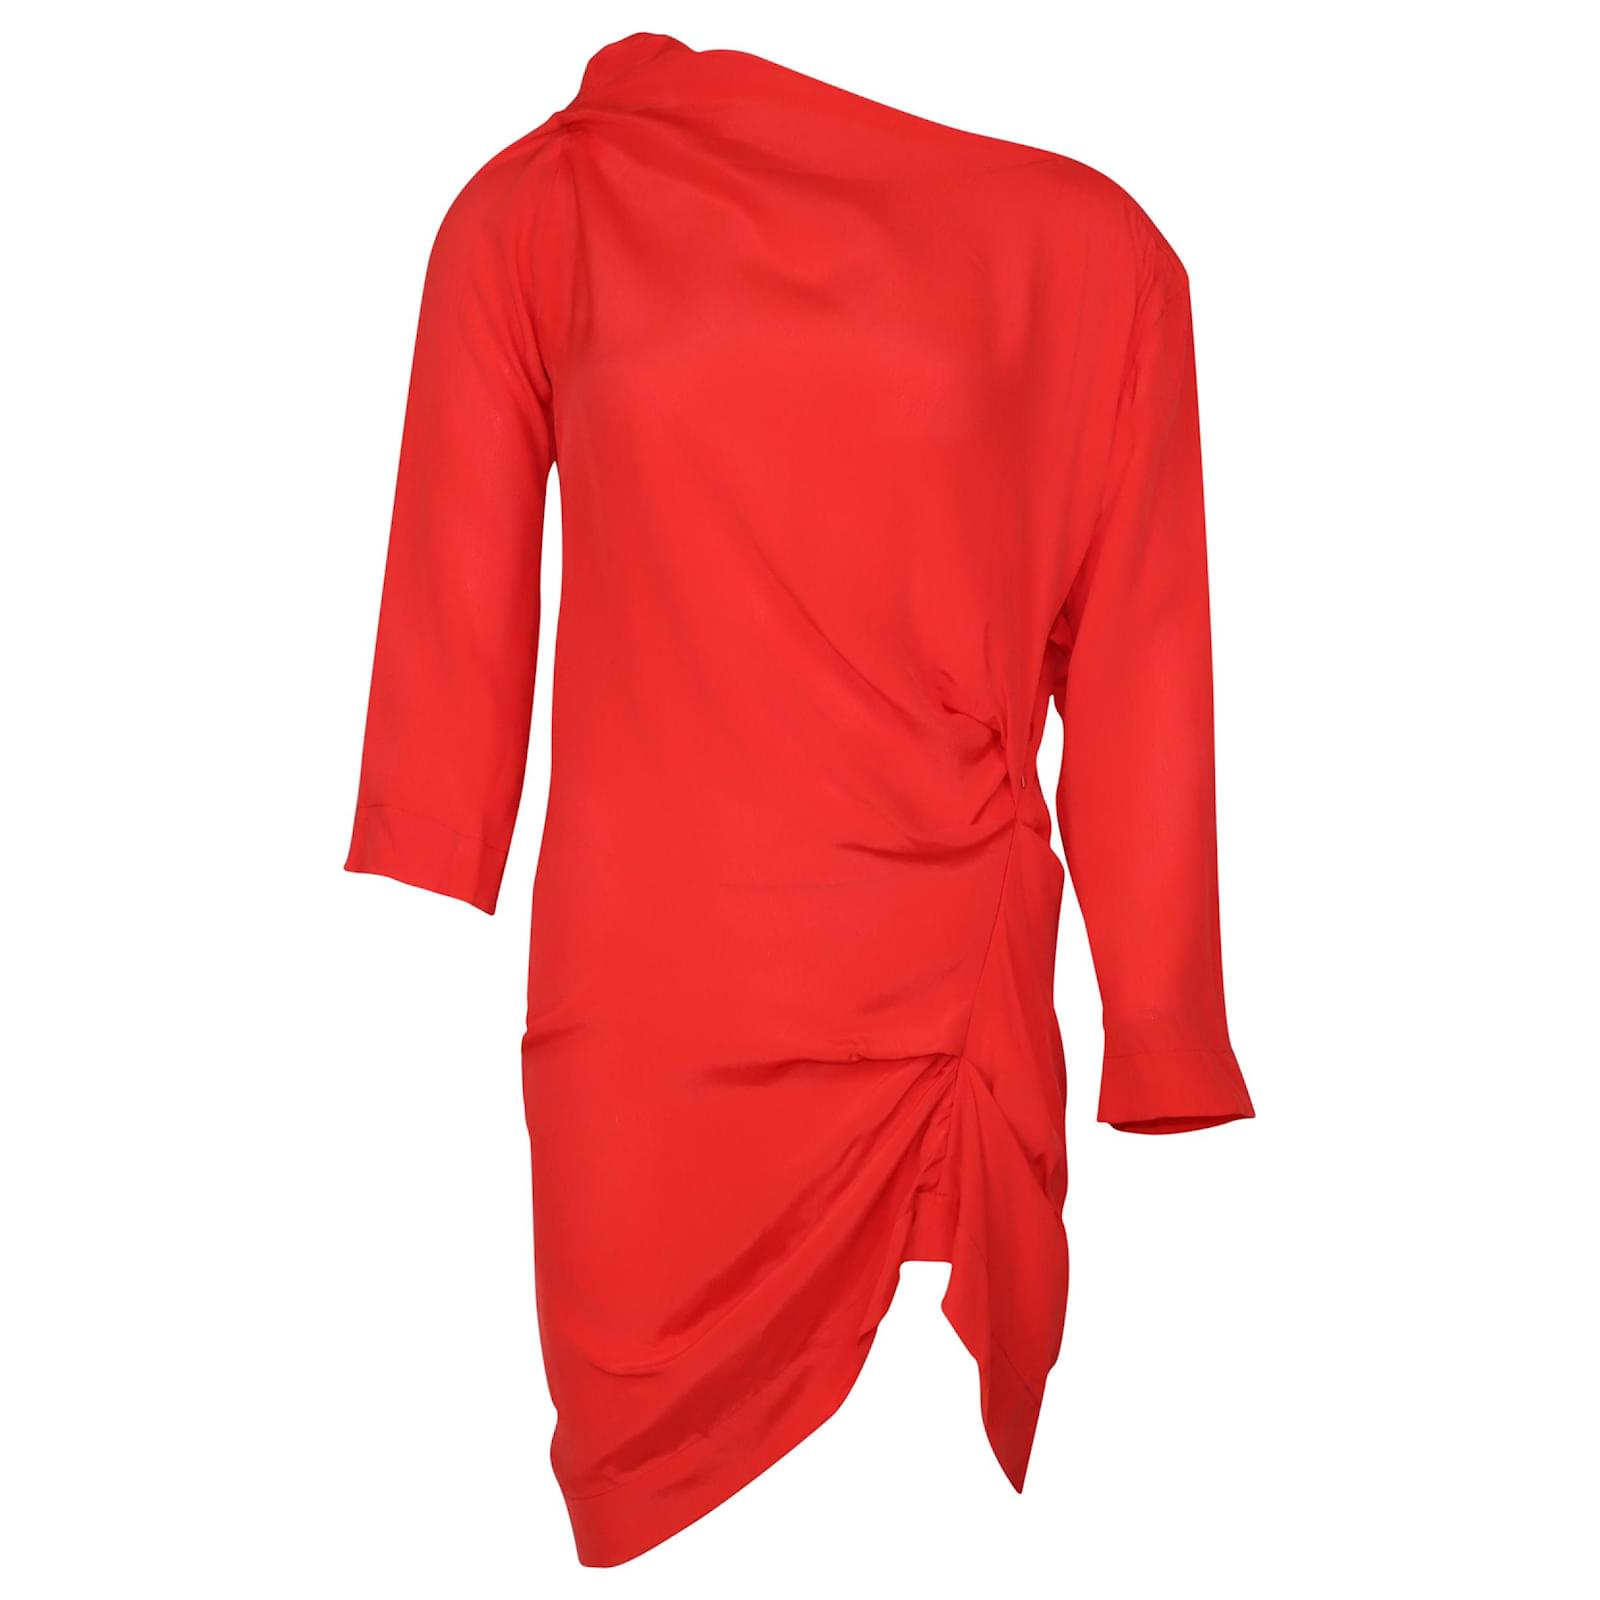 Vivienne Westwood Anglomania Mini Taxa Dress in Red Viscose ref